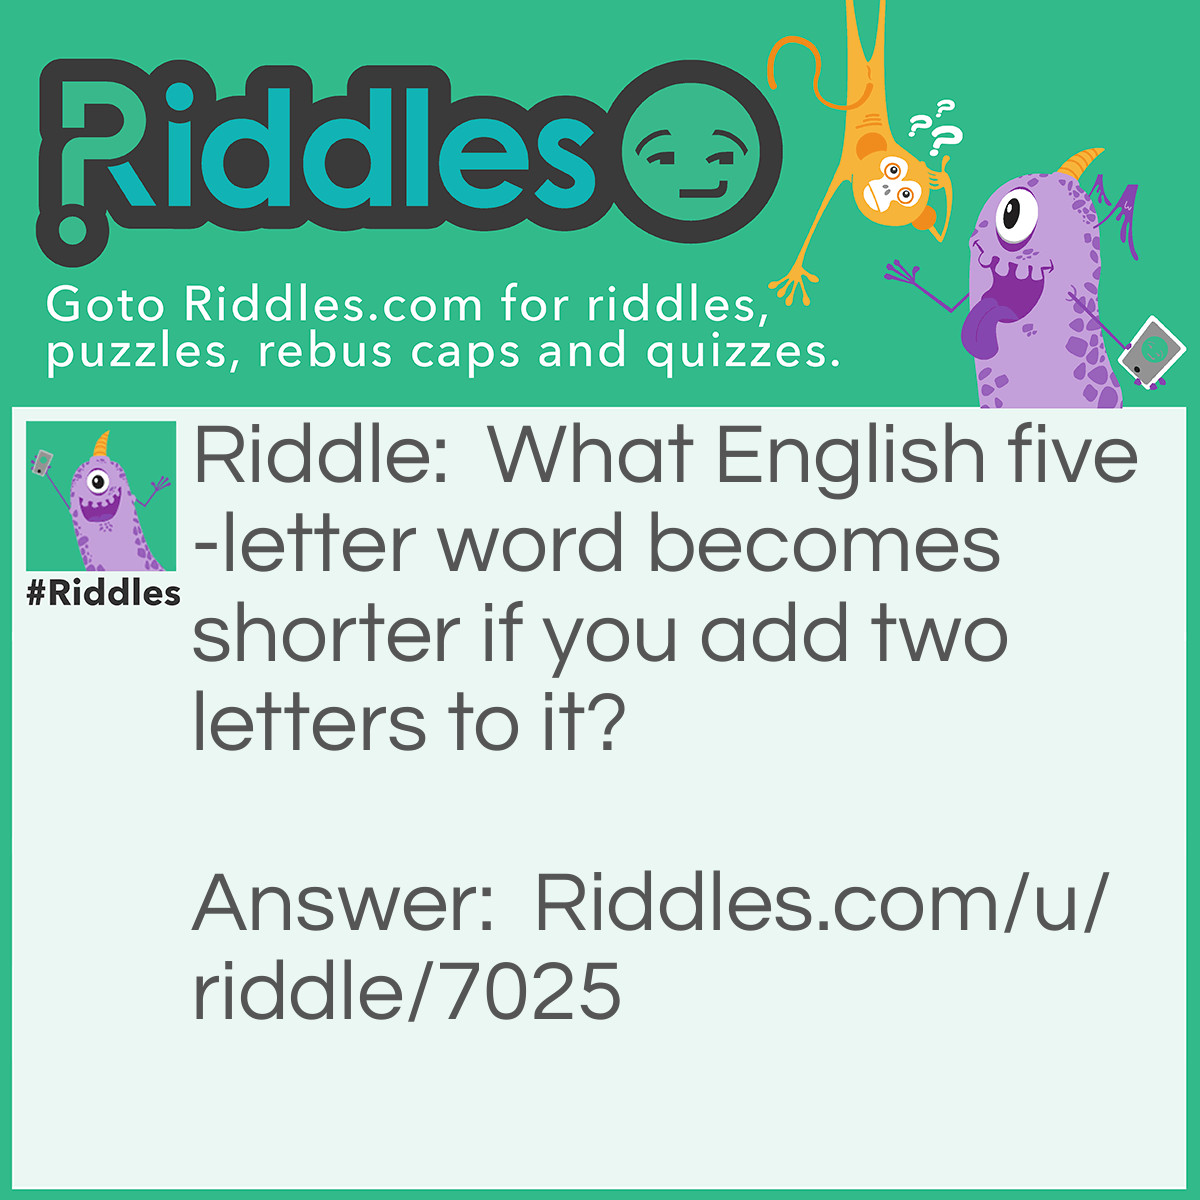 Riddle: What English five-letter word becomes shorter if you add two letters to it? Answer: "Short" (add +'er')